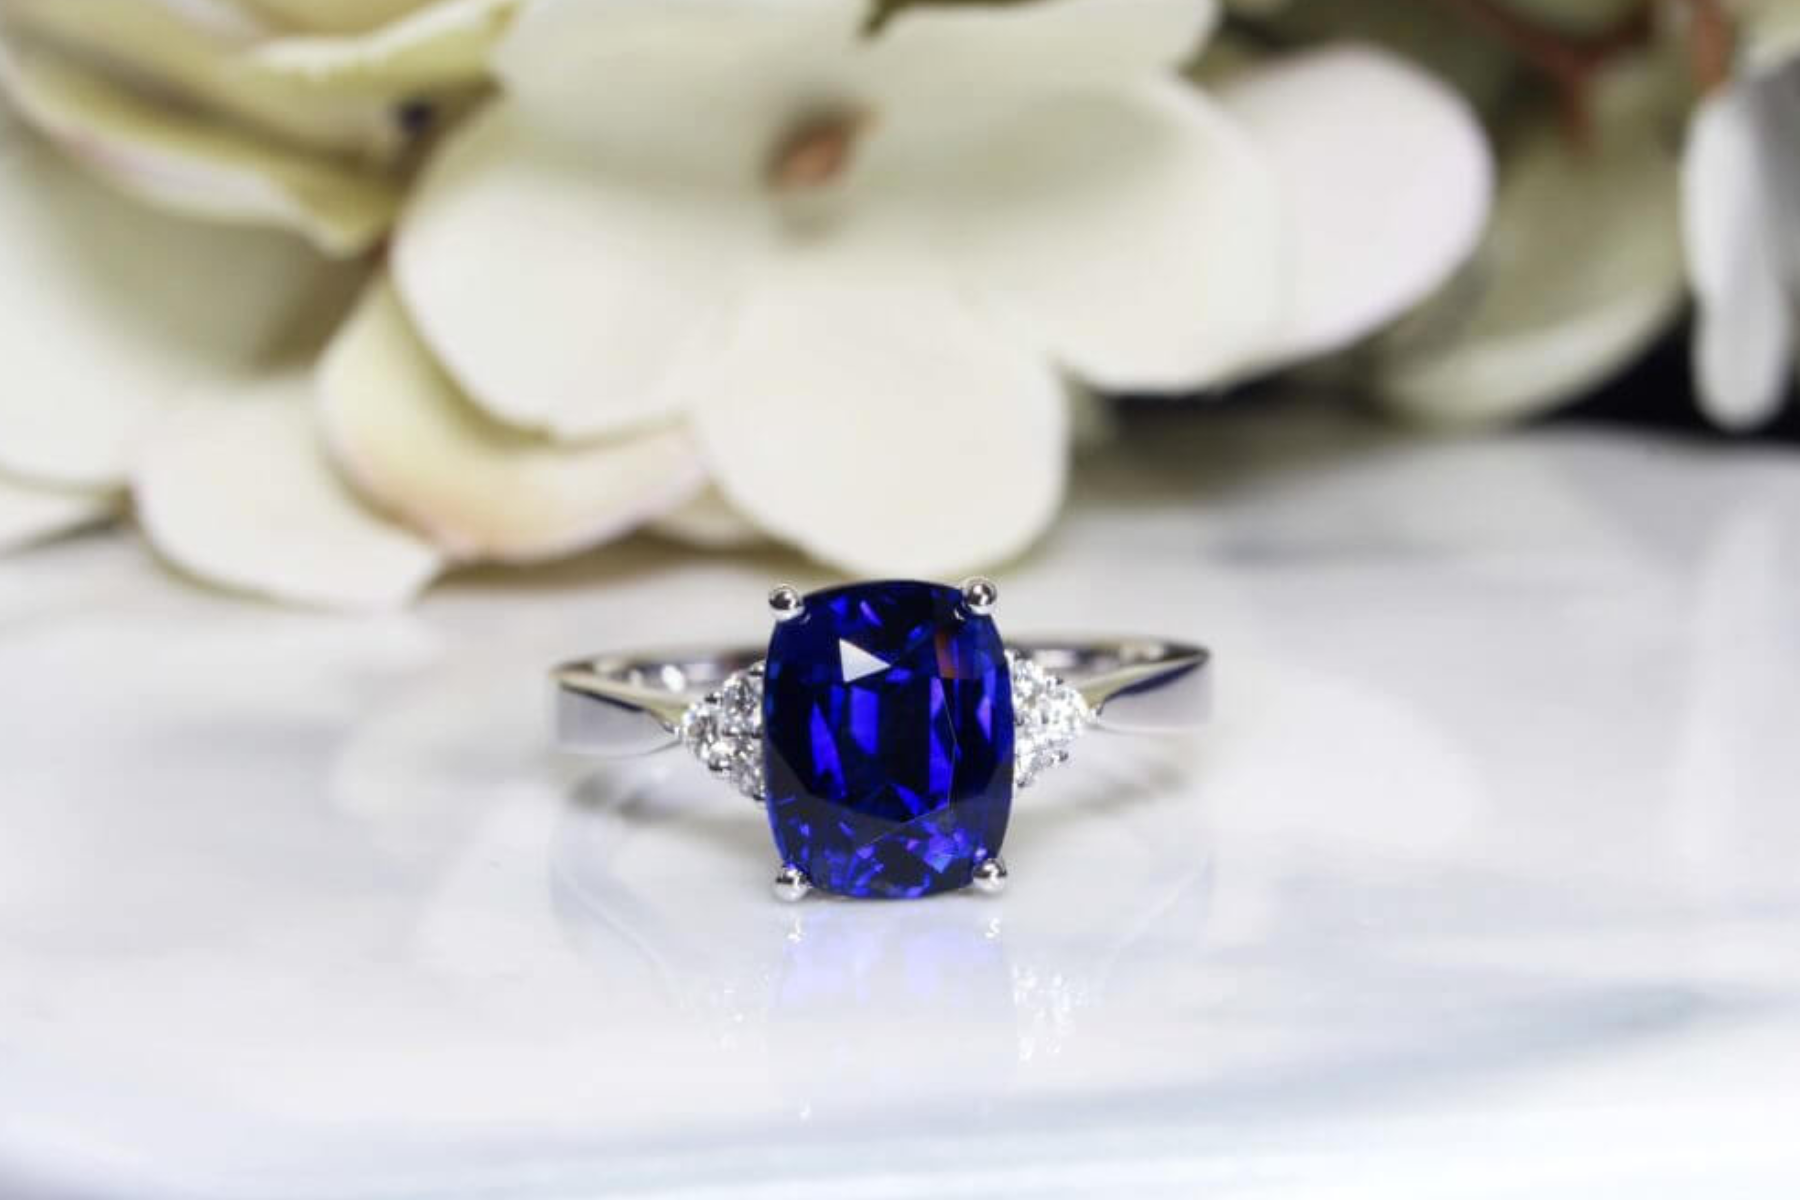 Sapphire stone ring with white flowers behind